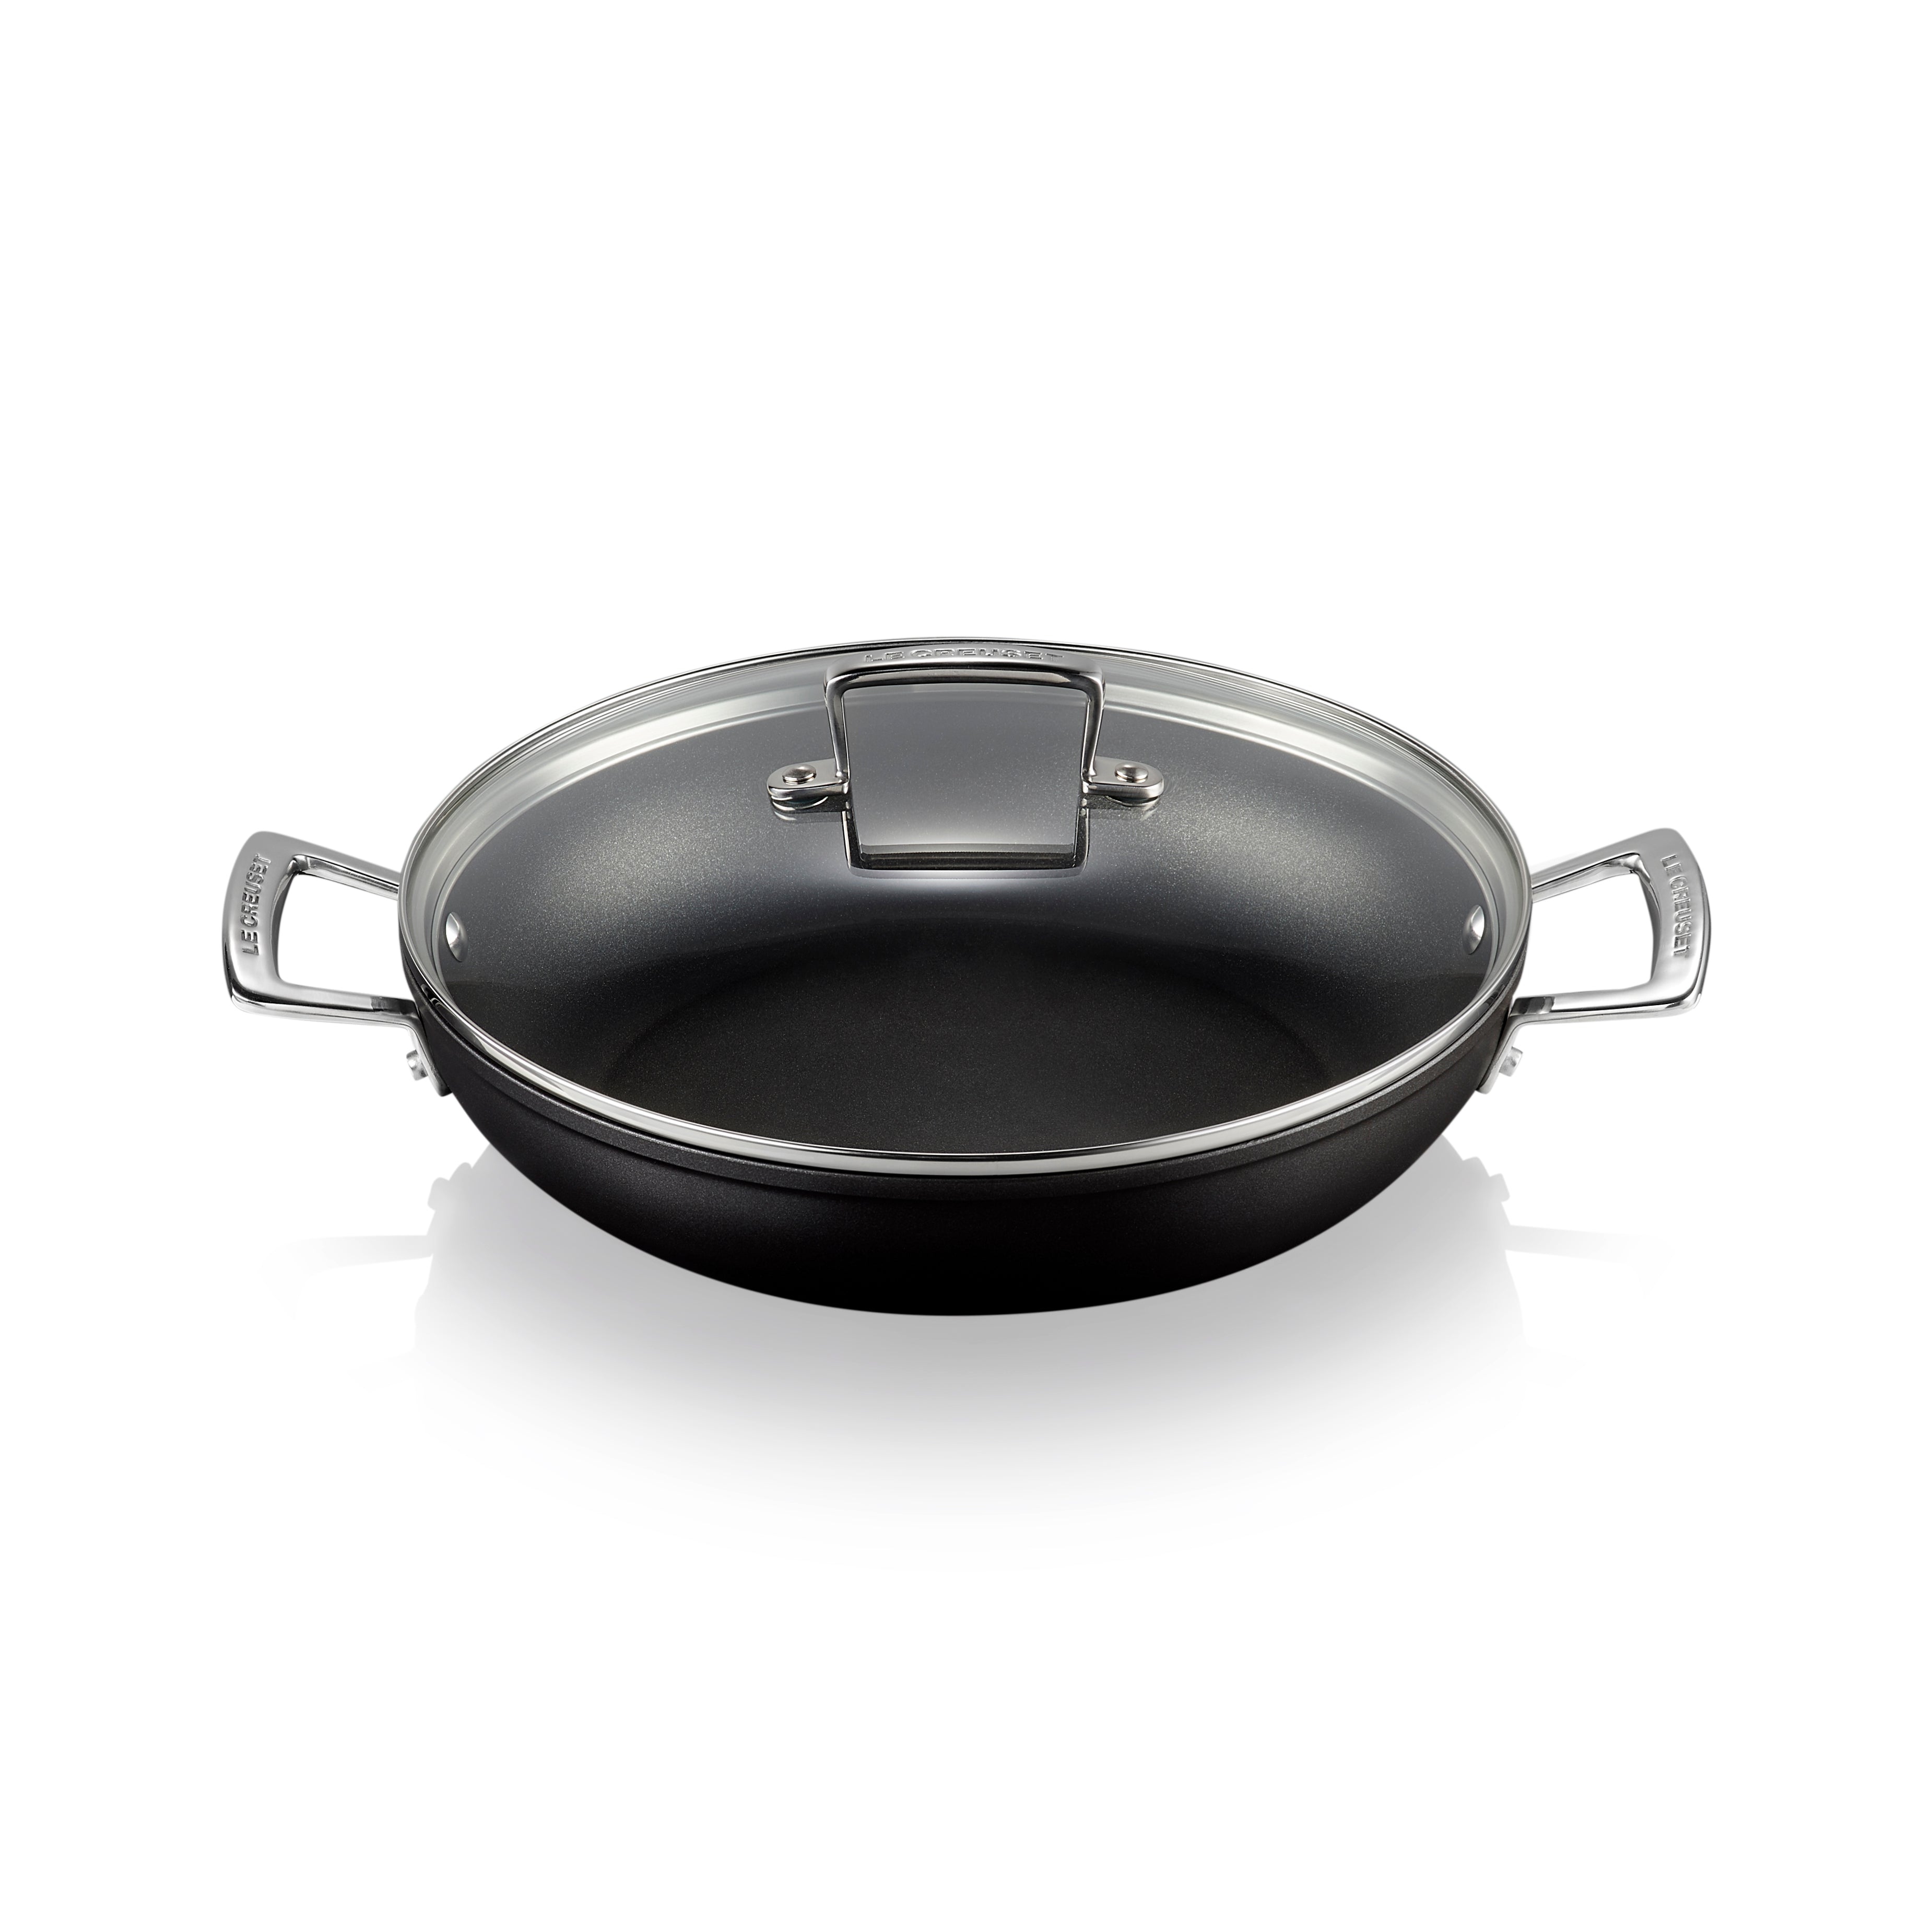 LE CREUSET NONE STICK SHALLOW CASSEROLE WITH GLASS LID